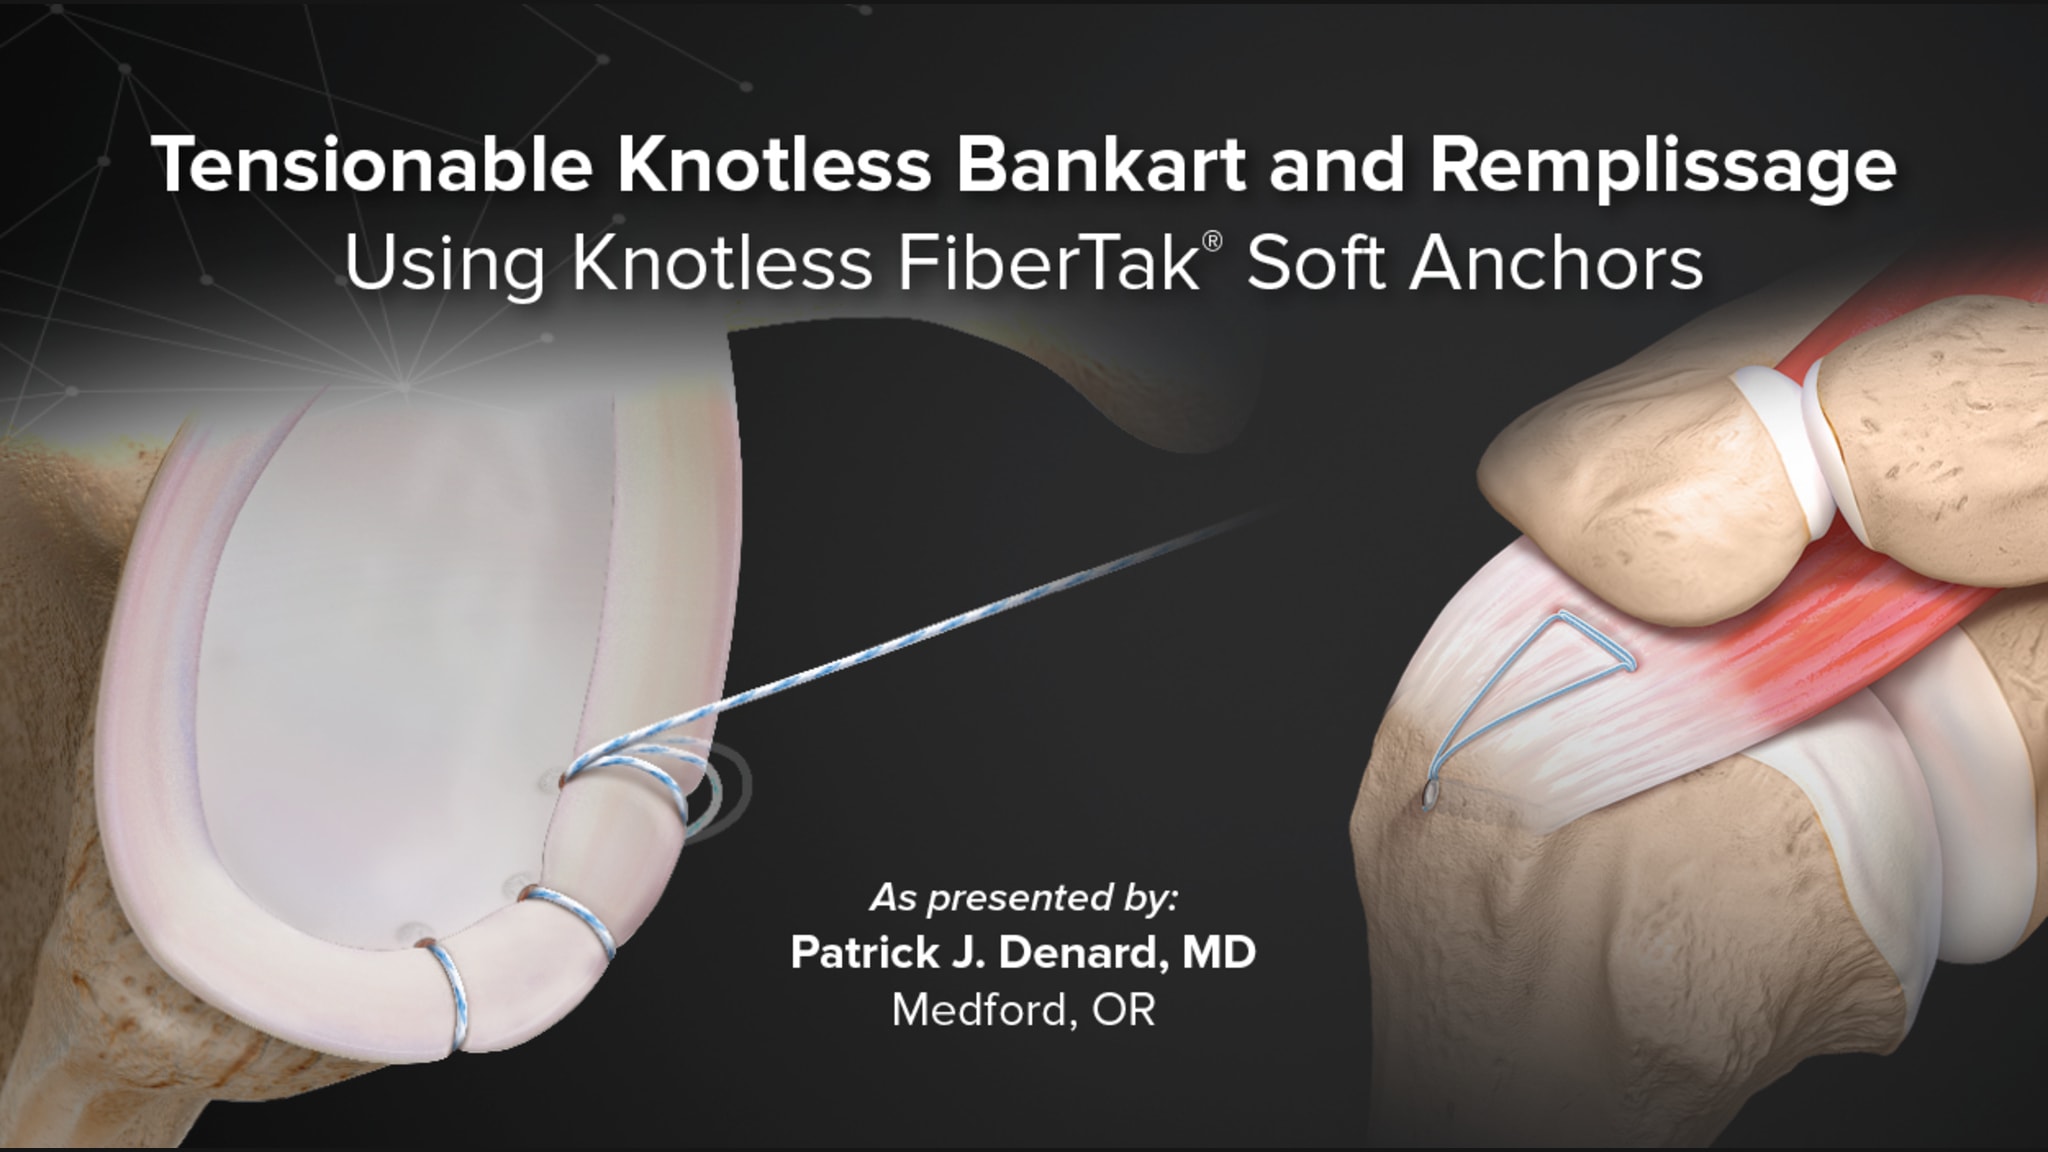 Tensionable Knotless Bankart and Remplissage Using Knotless FiberTak® Soft Anchors